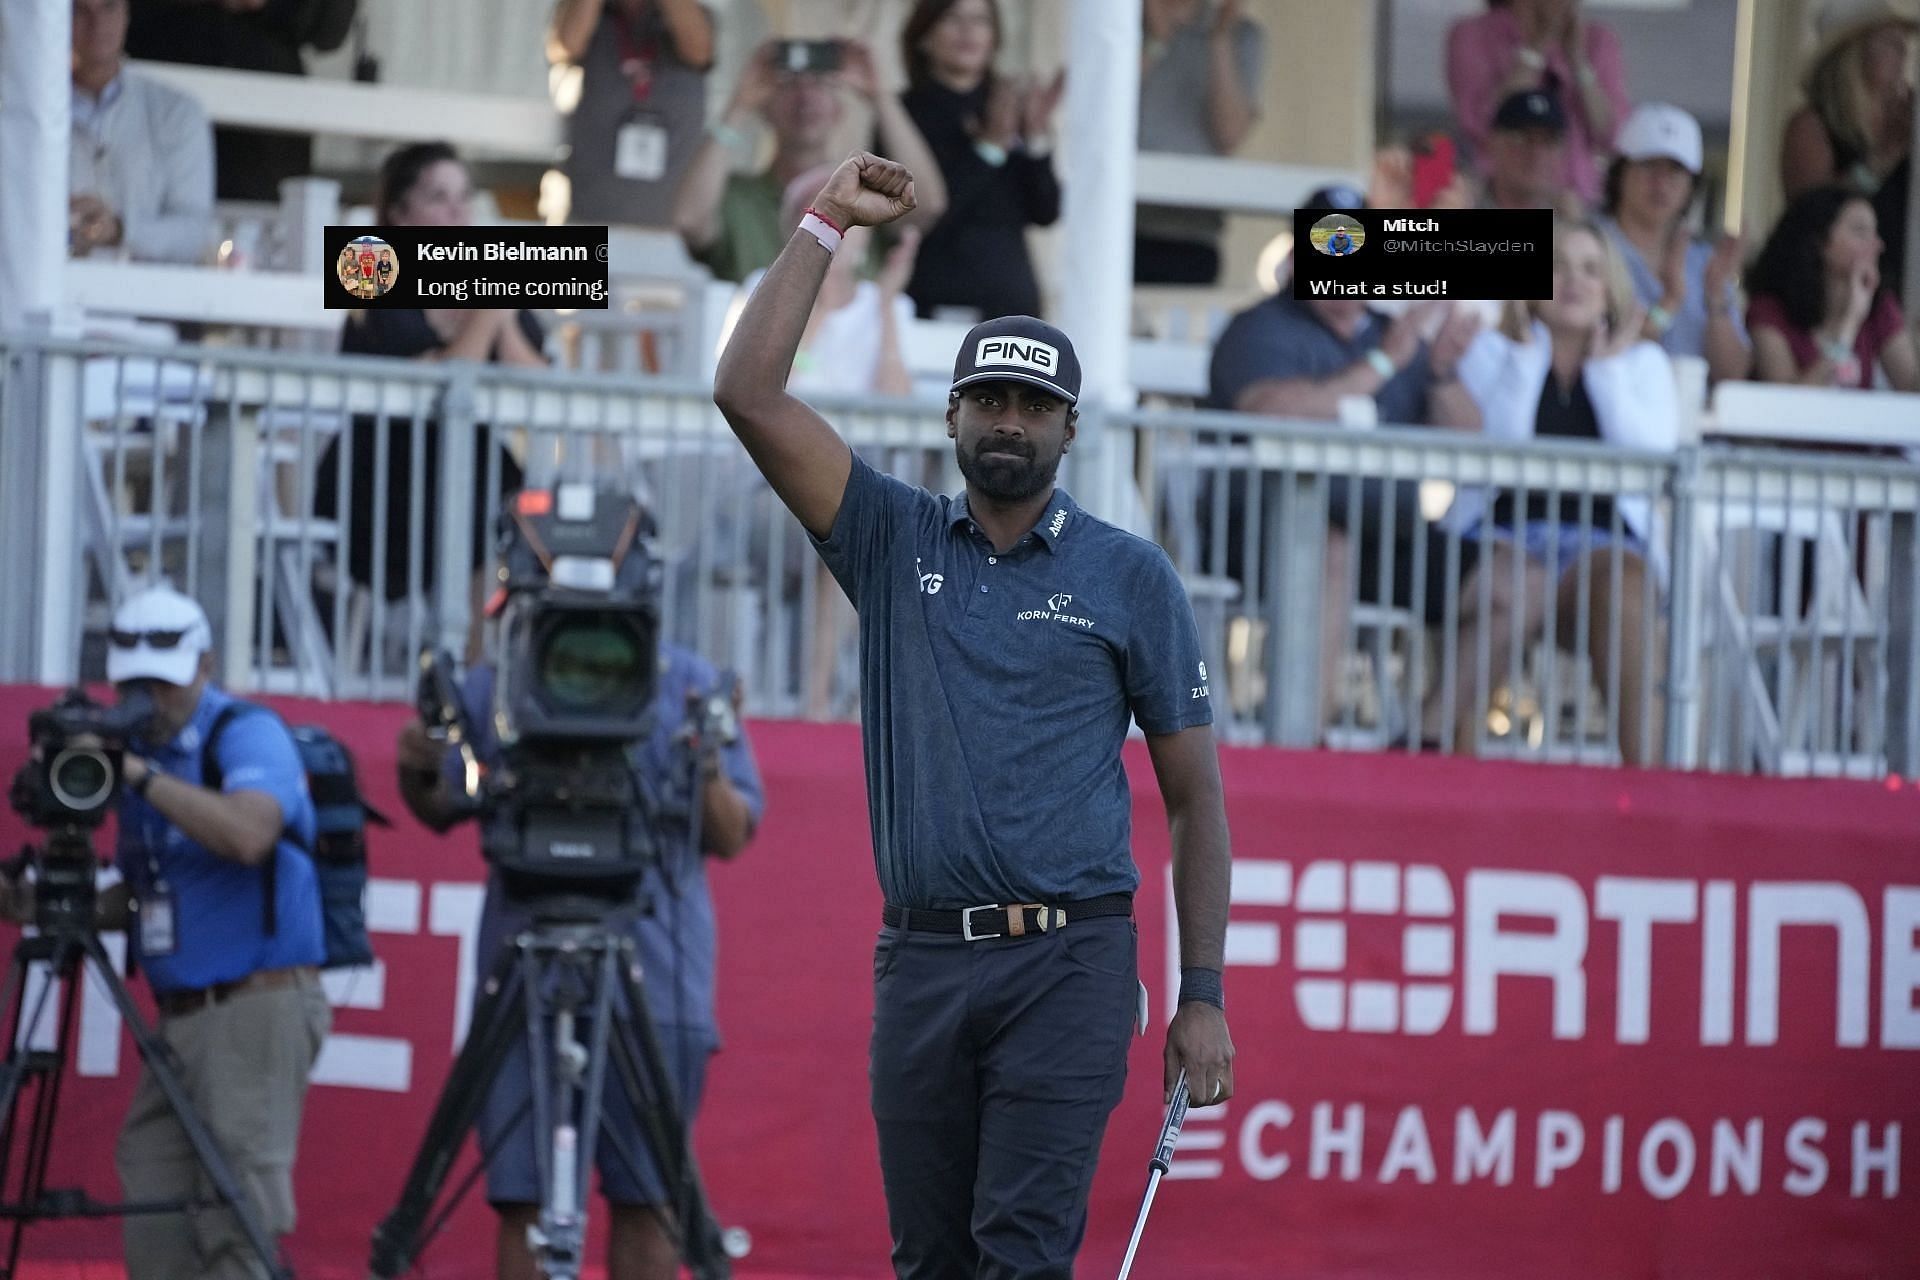 Sahith Theegala reacts after winning the Fortinet Championship 2023